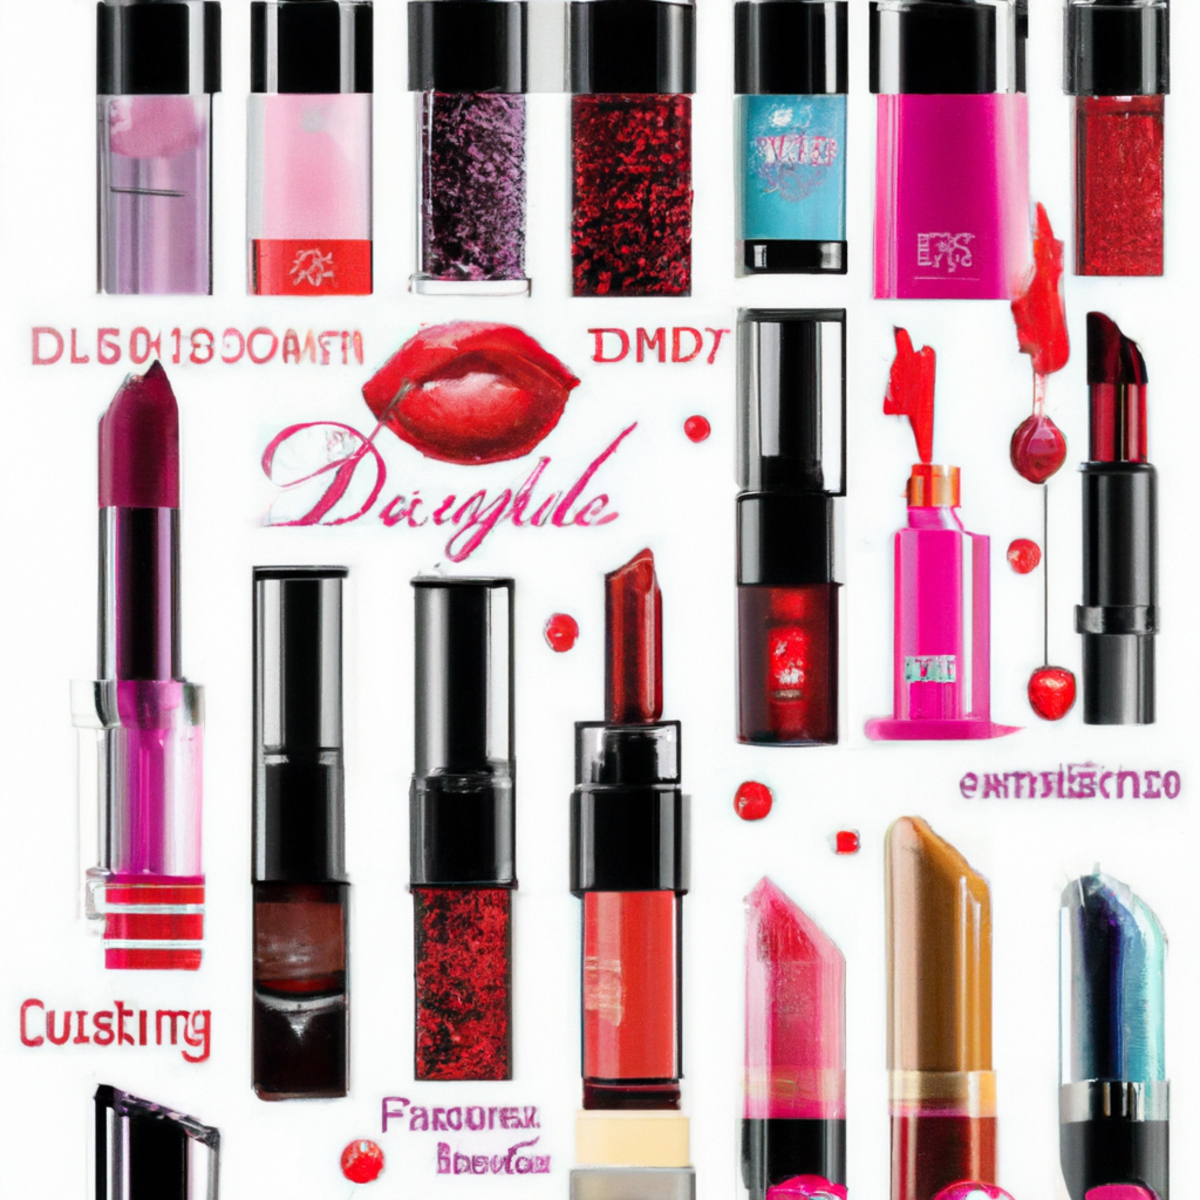 Vibrant lip colors steal the spotlight in a stunning photo of lipsticks, glosses, and stains on a mirrored surface.